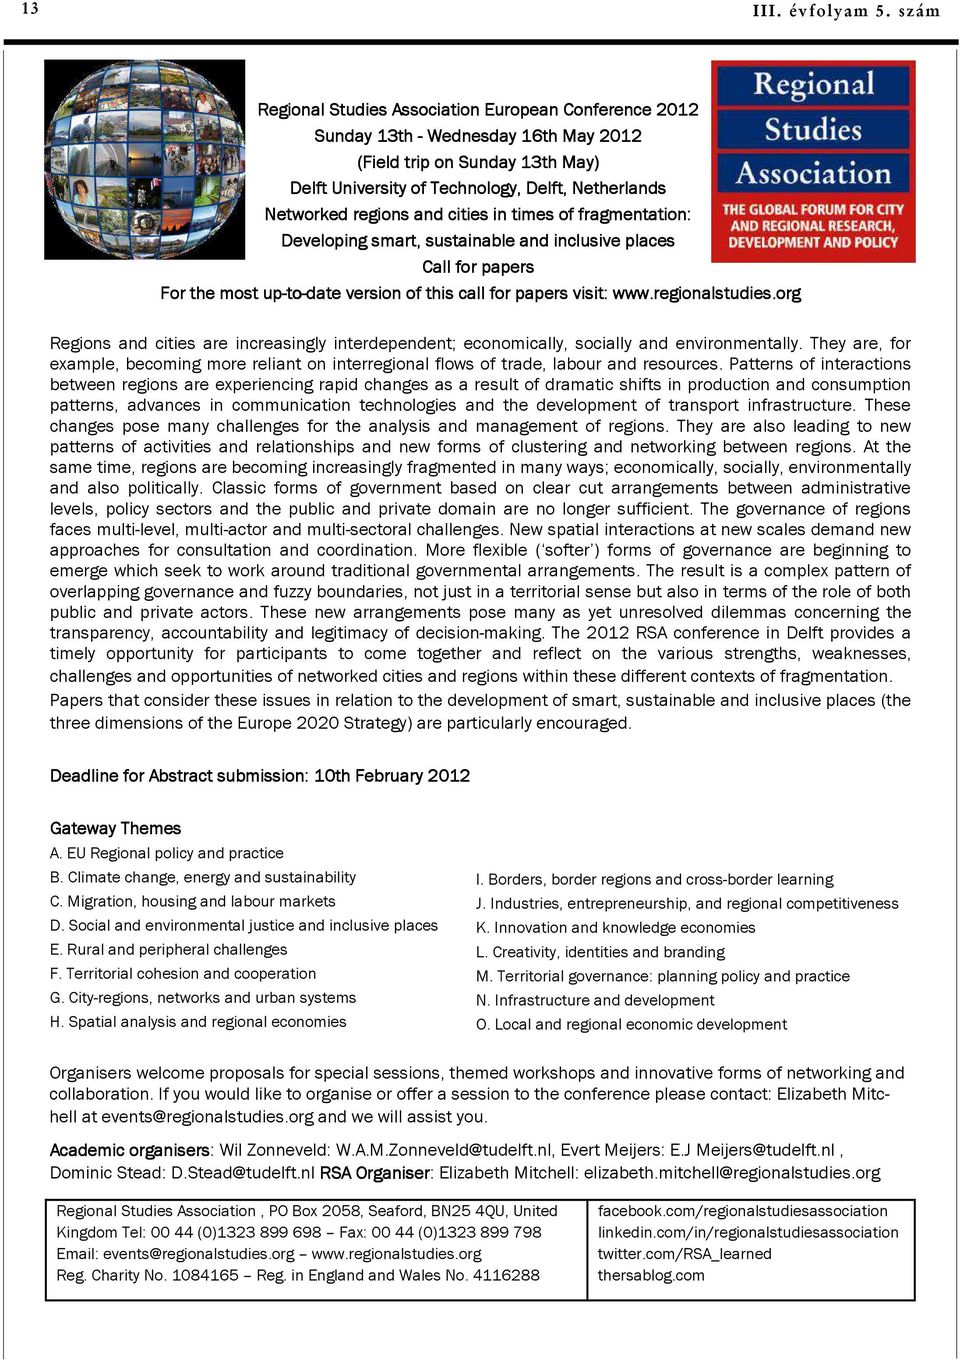 and cities in times of fragmentation: Developing smart, sustainable and inclusive places Call for papers For the most up-to to-date version of this call for papers visit: www.regionalstudies.